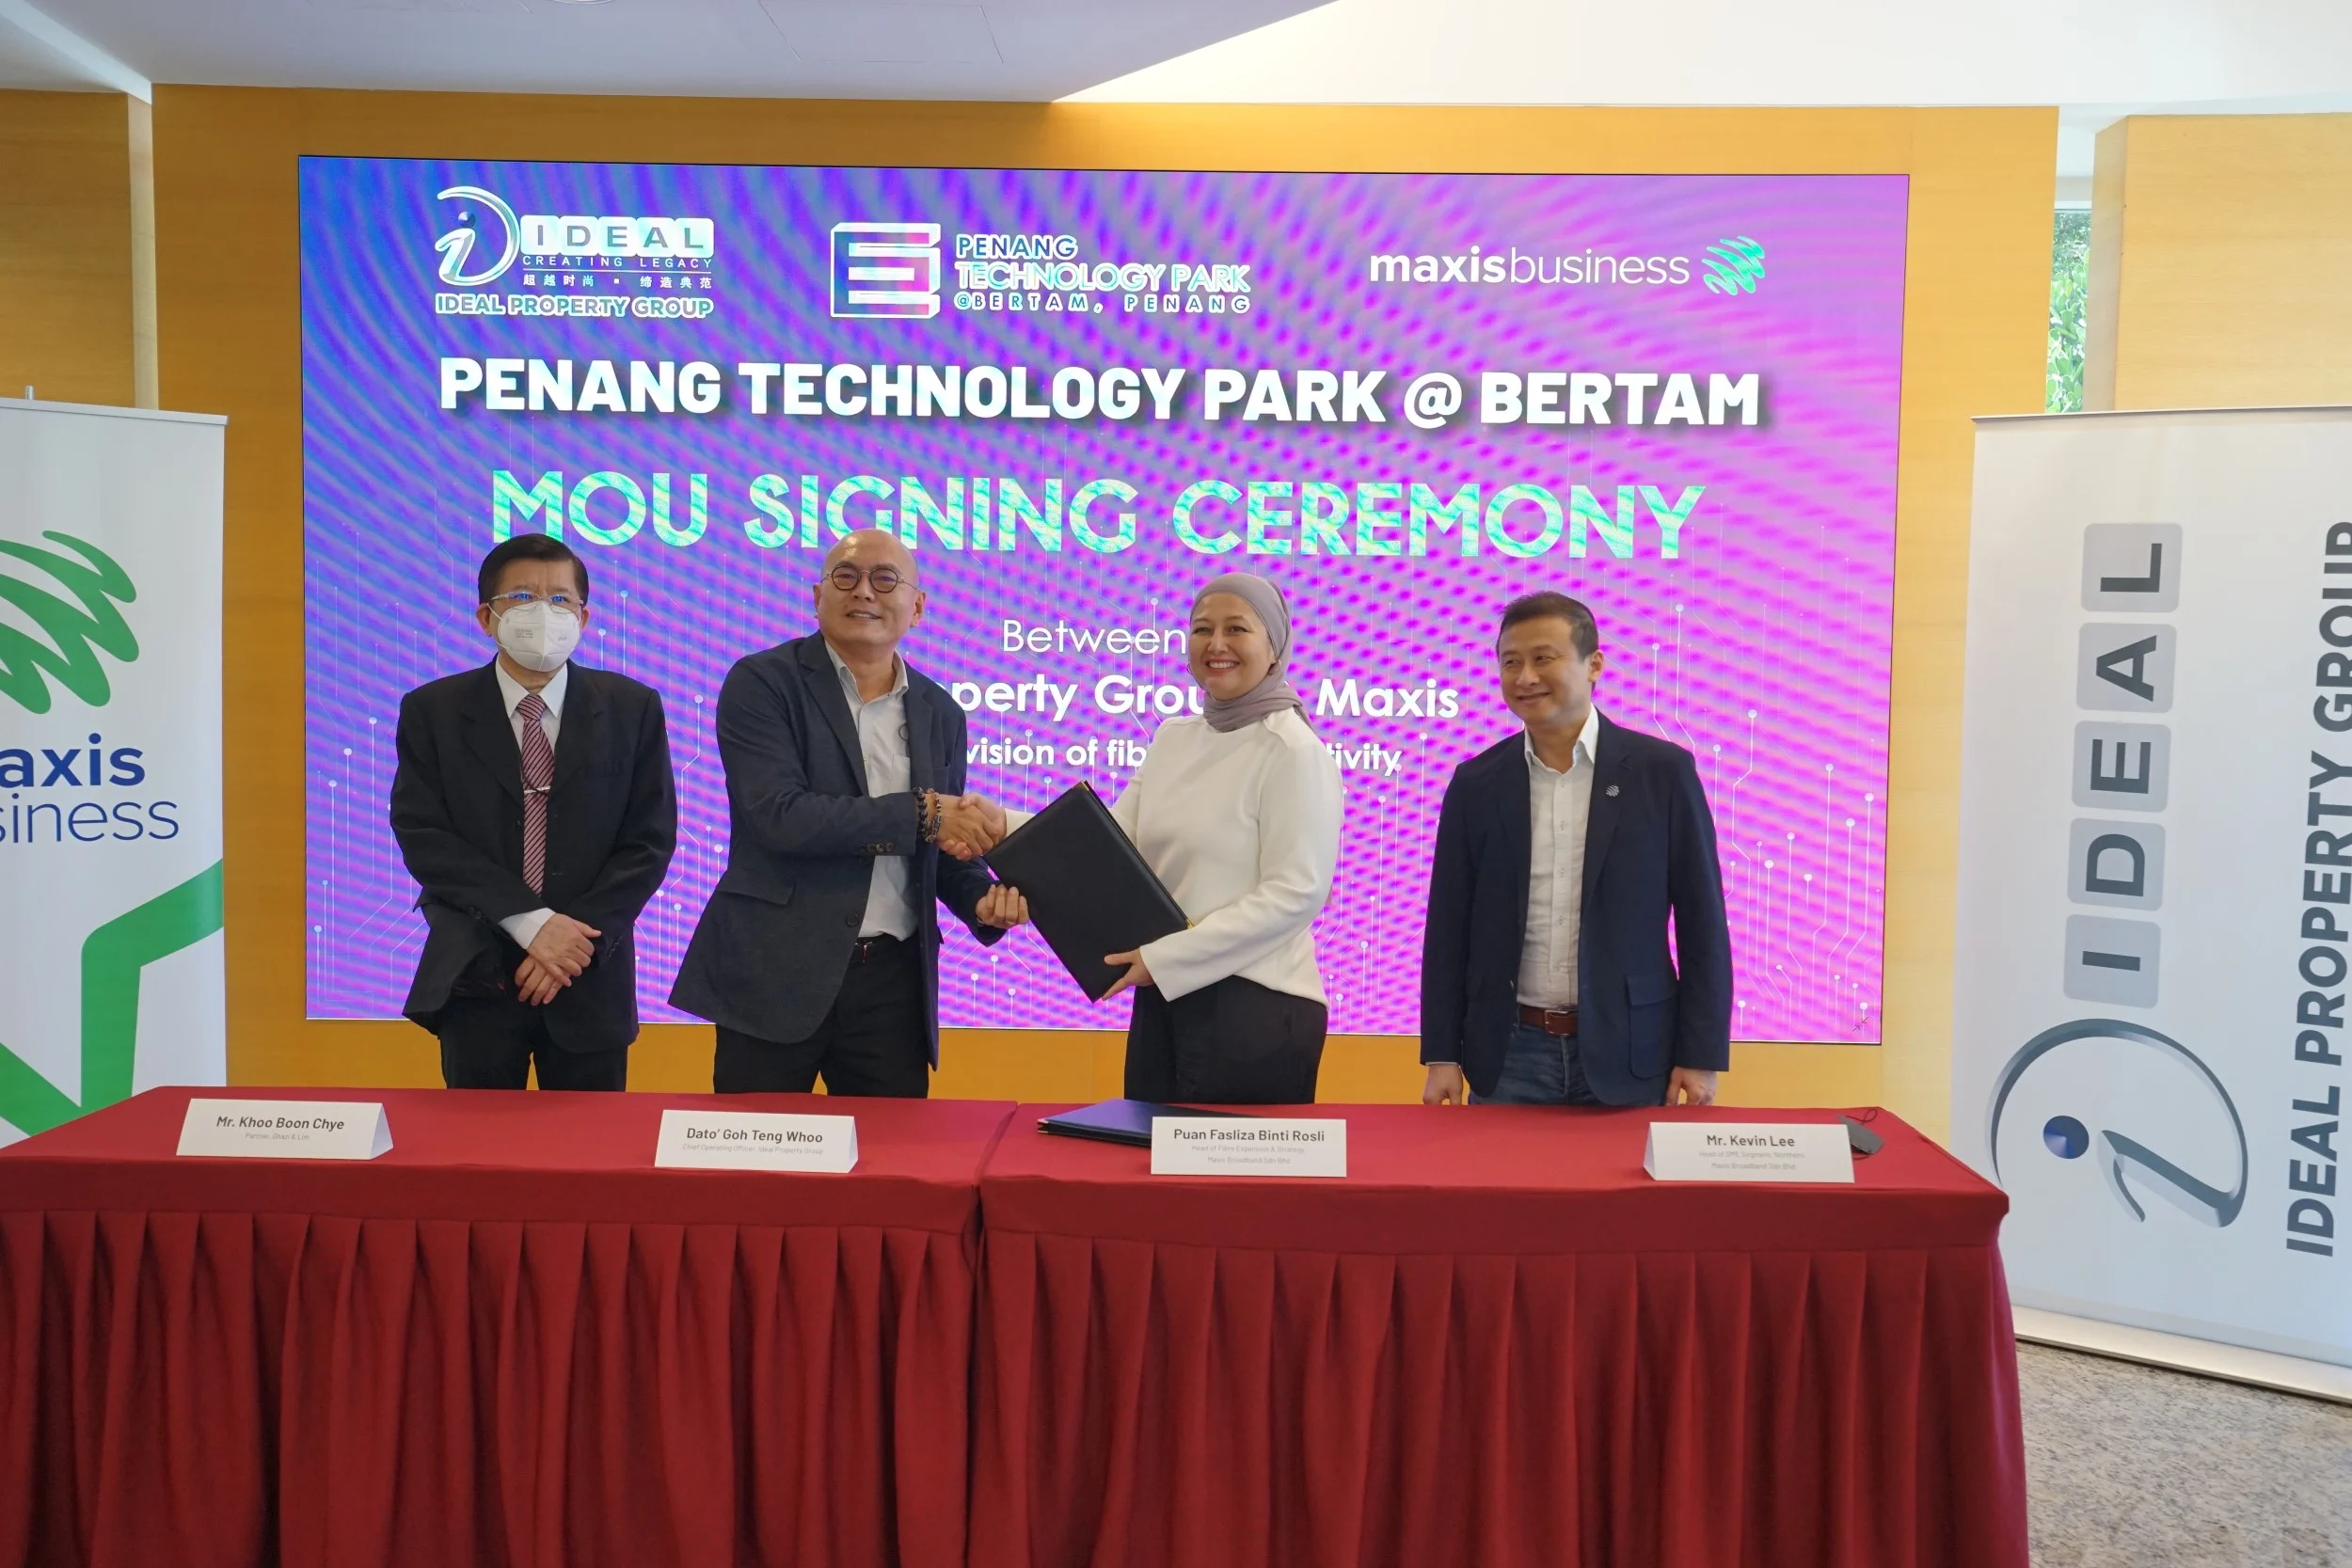 Maxis x Ideal Property Group fibre collaboration